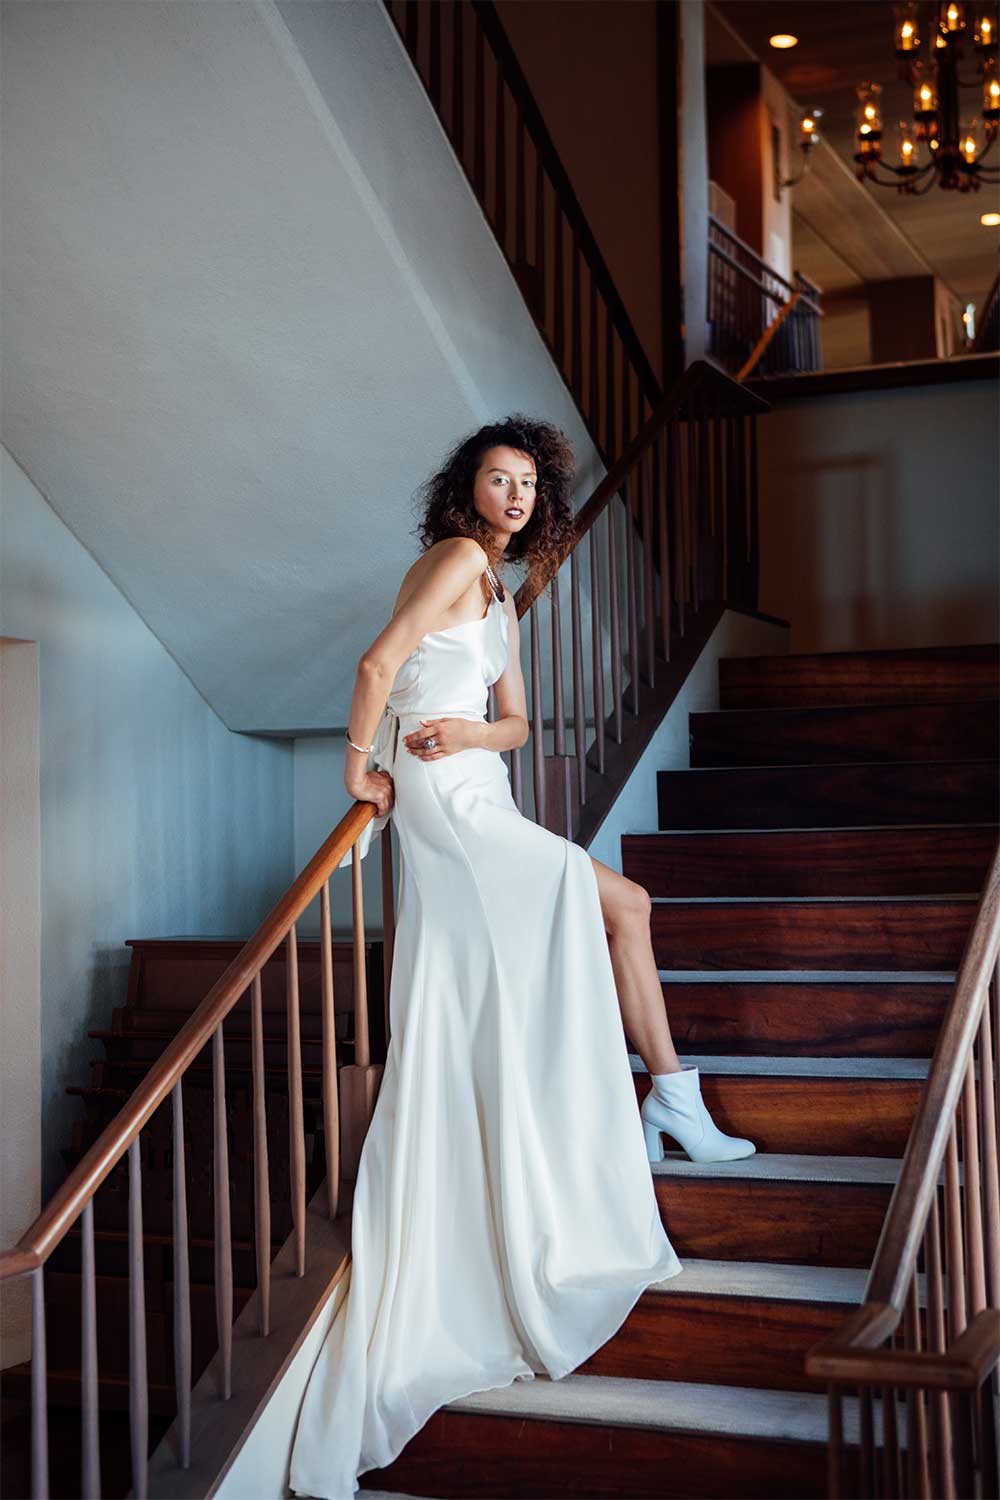 Woman in a white bridal dress standing on stairs